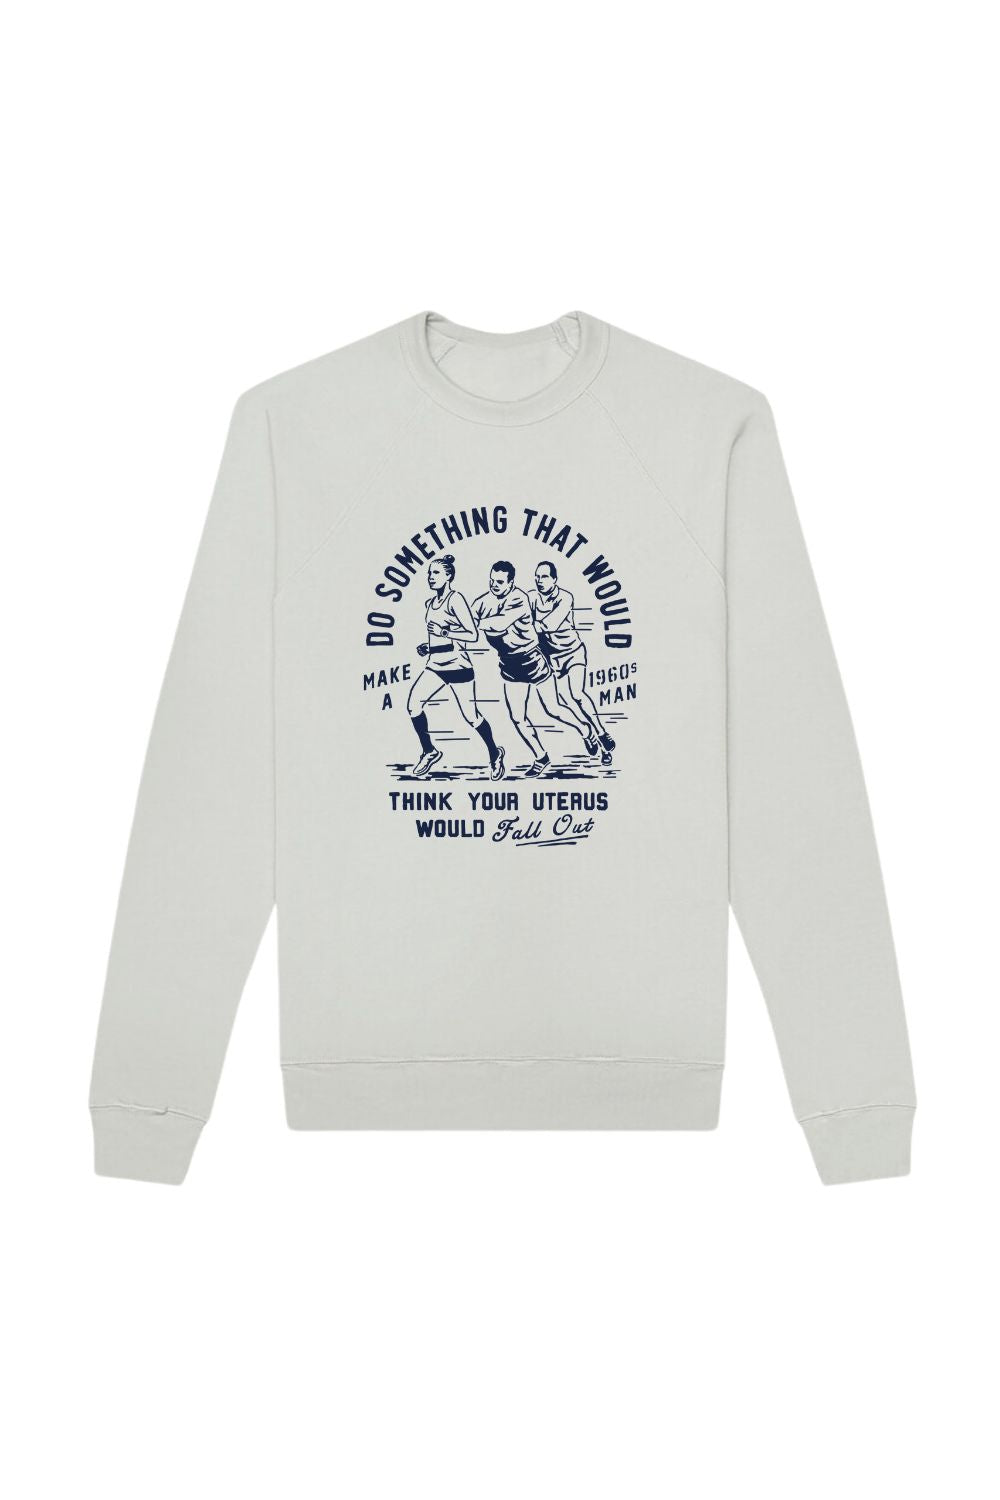 Do Something that would make a 1960s man think your uterus would fall out Sweatshirt